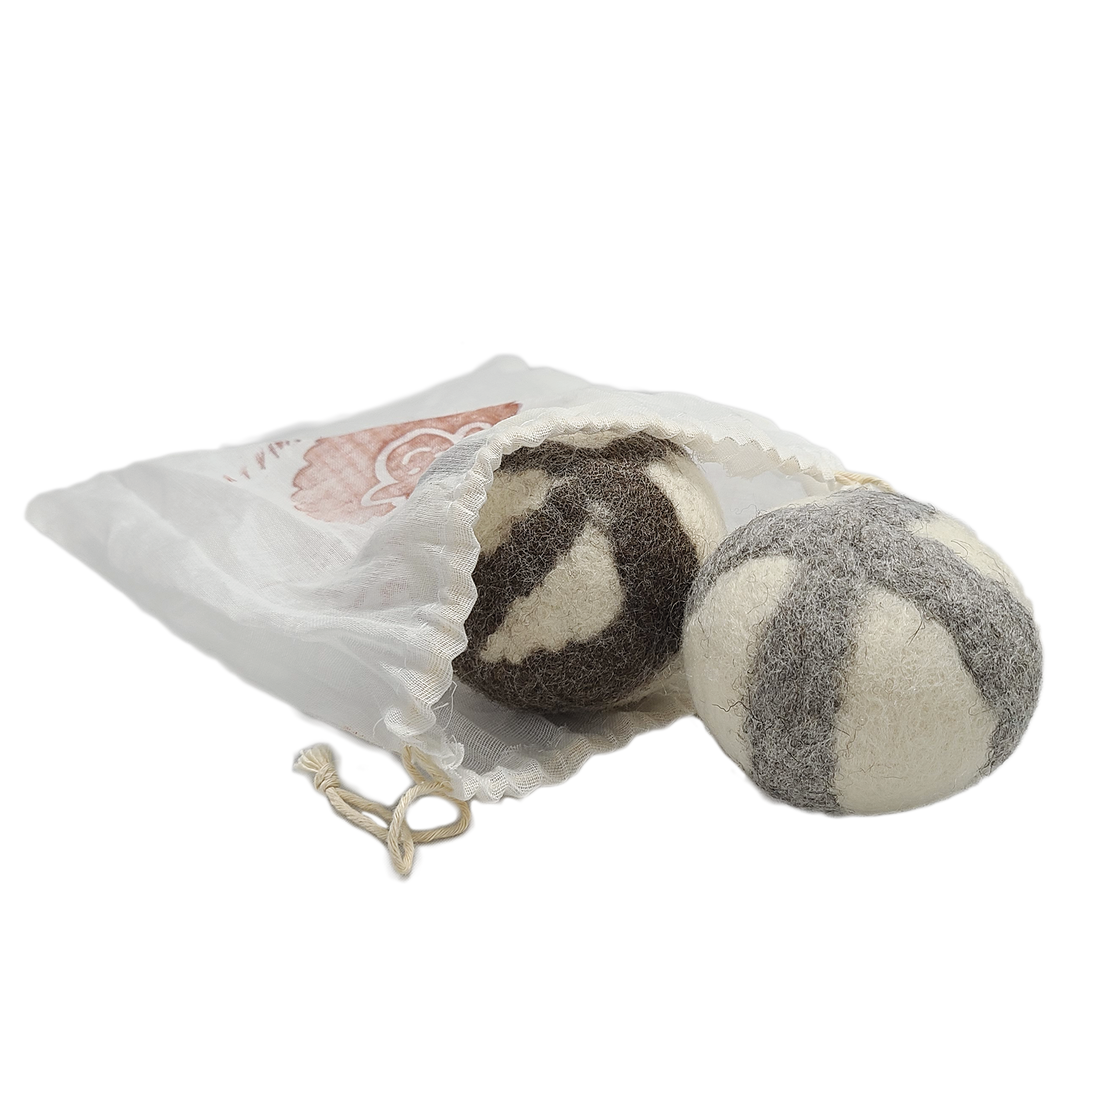 "Woolf" Balls for Dogs - 6-Pack, 2 Balls in Each Cotton Pouch